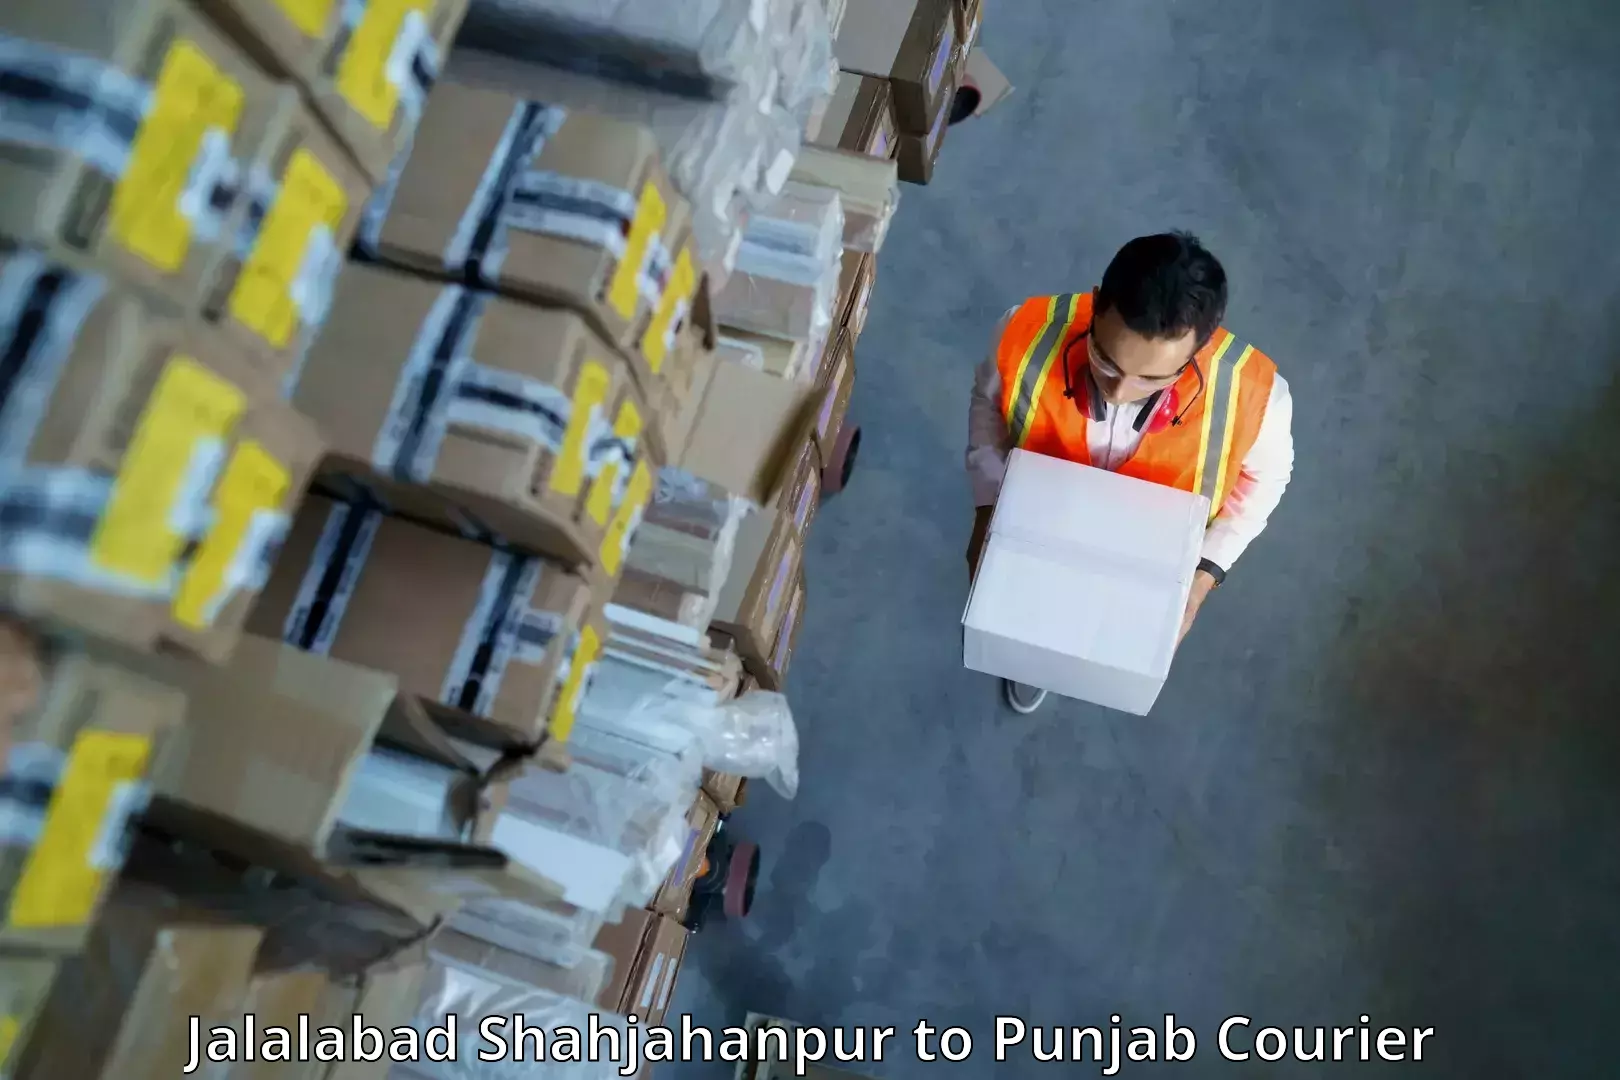 Urgent courier needs Jalalabad Shahjahanpur to Malout